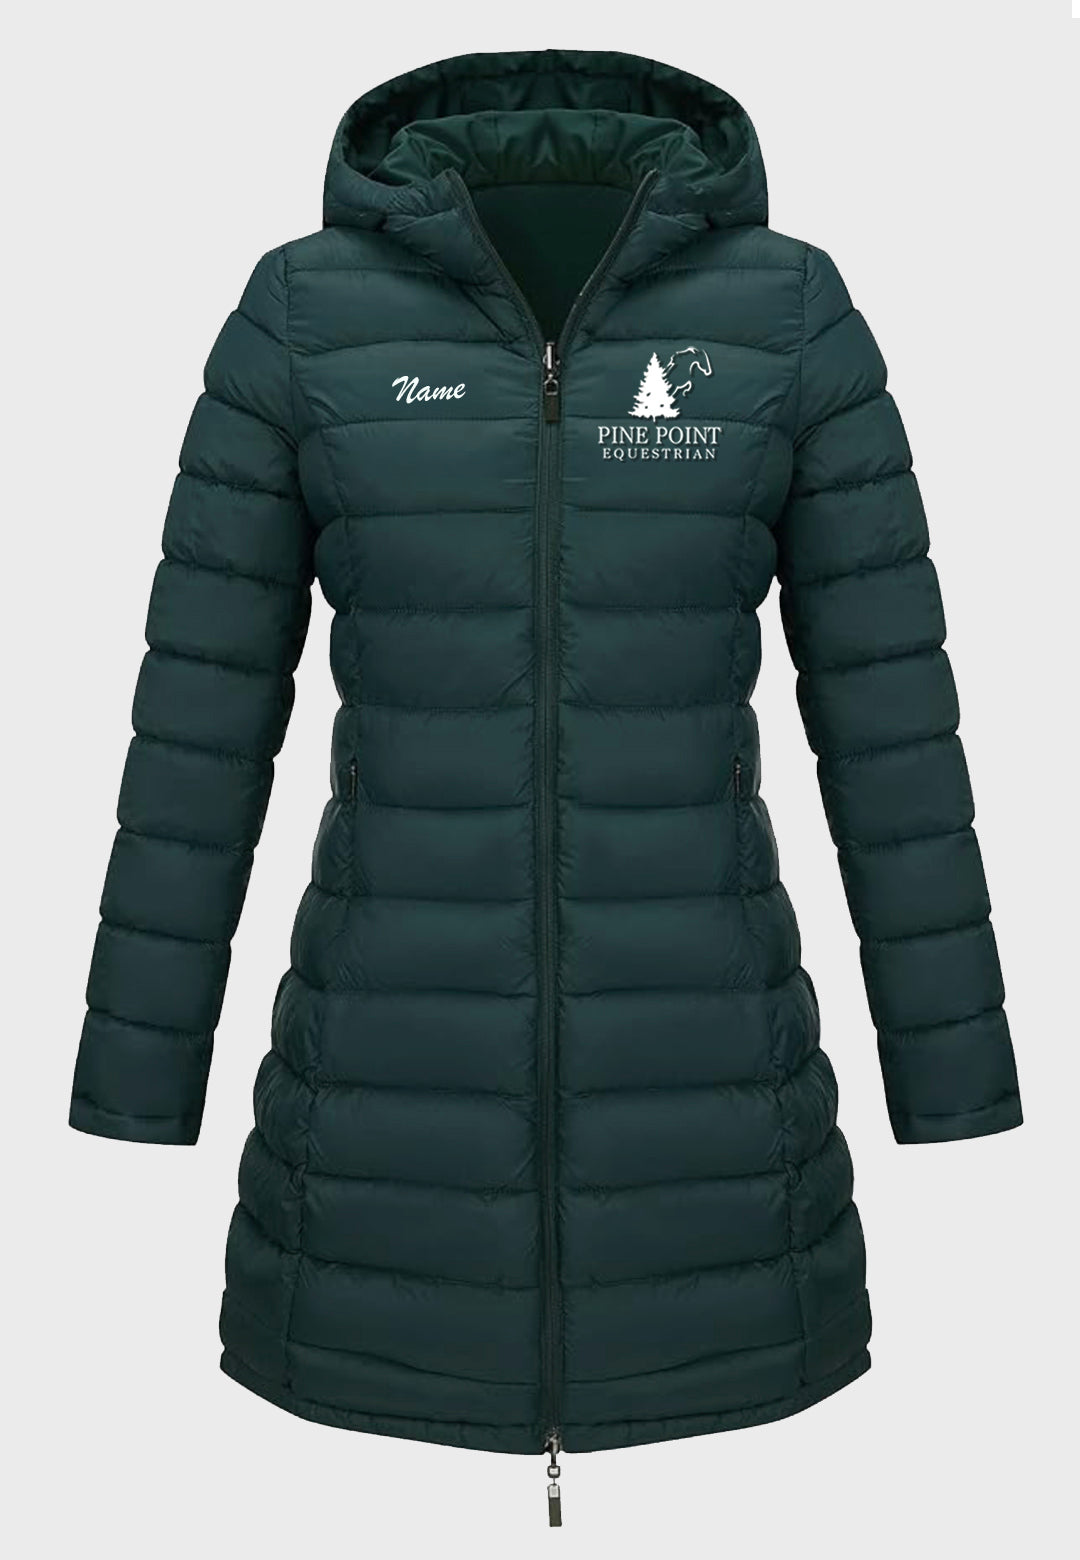 Pine Point Equestrian team Bellivera Quilted Long Hooded Puffer Jacket